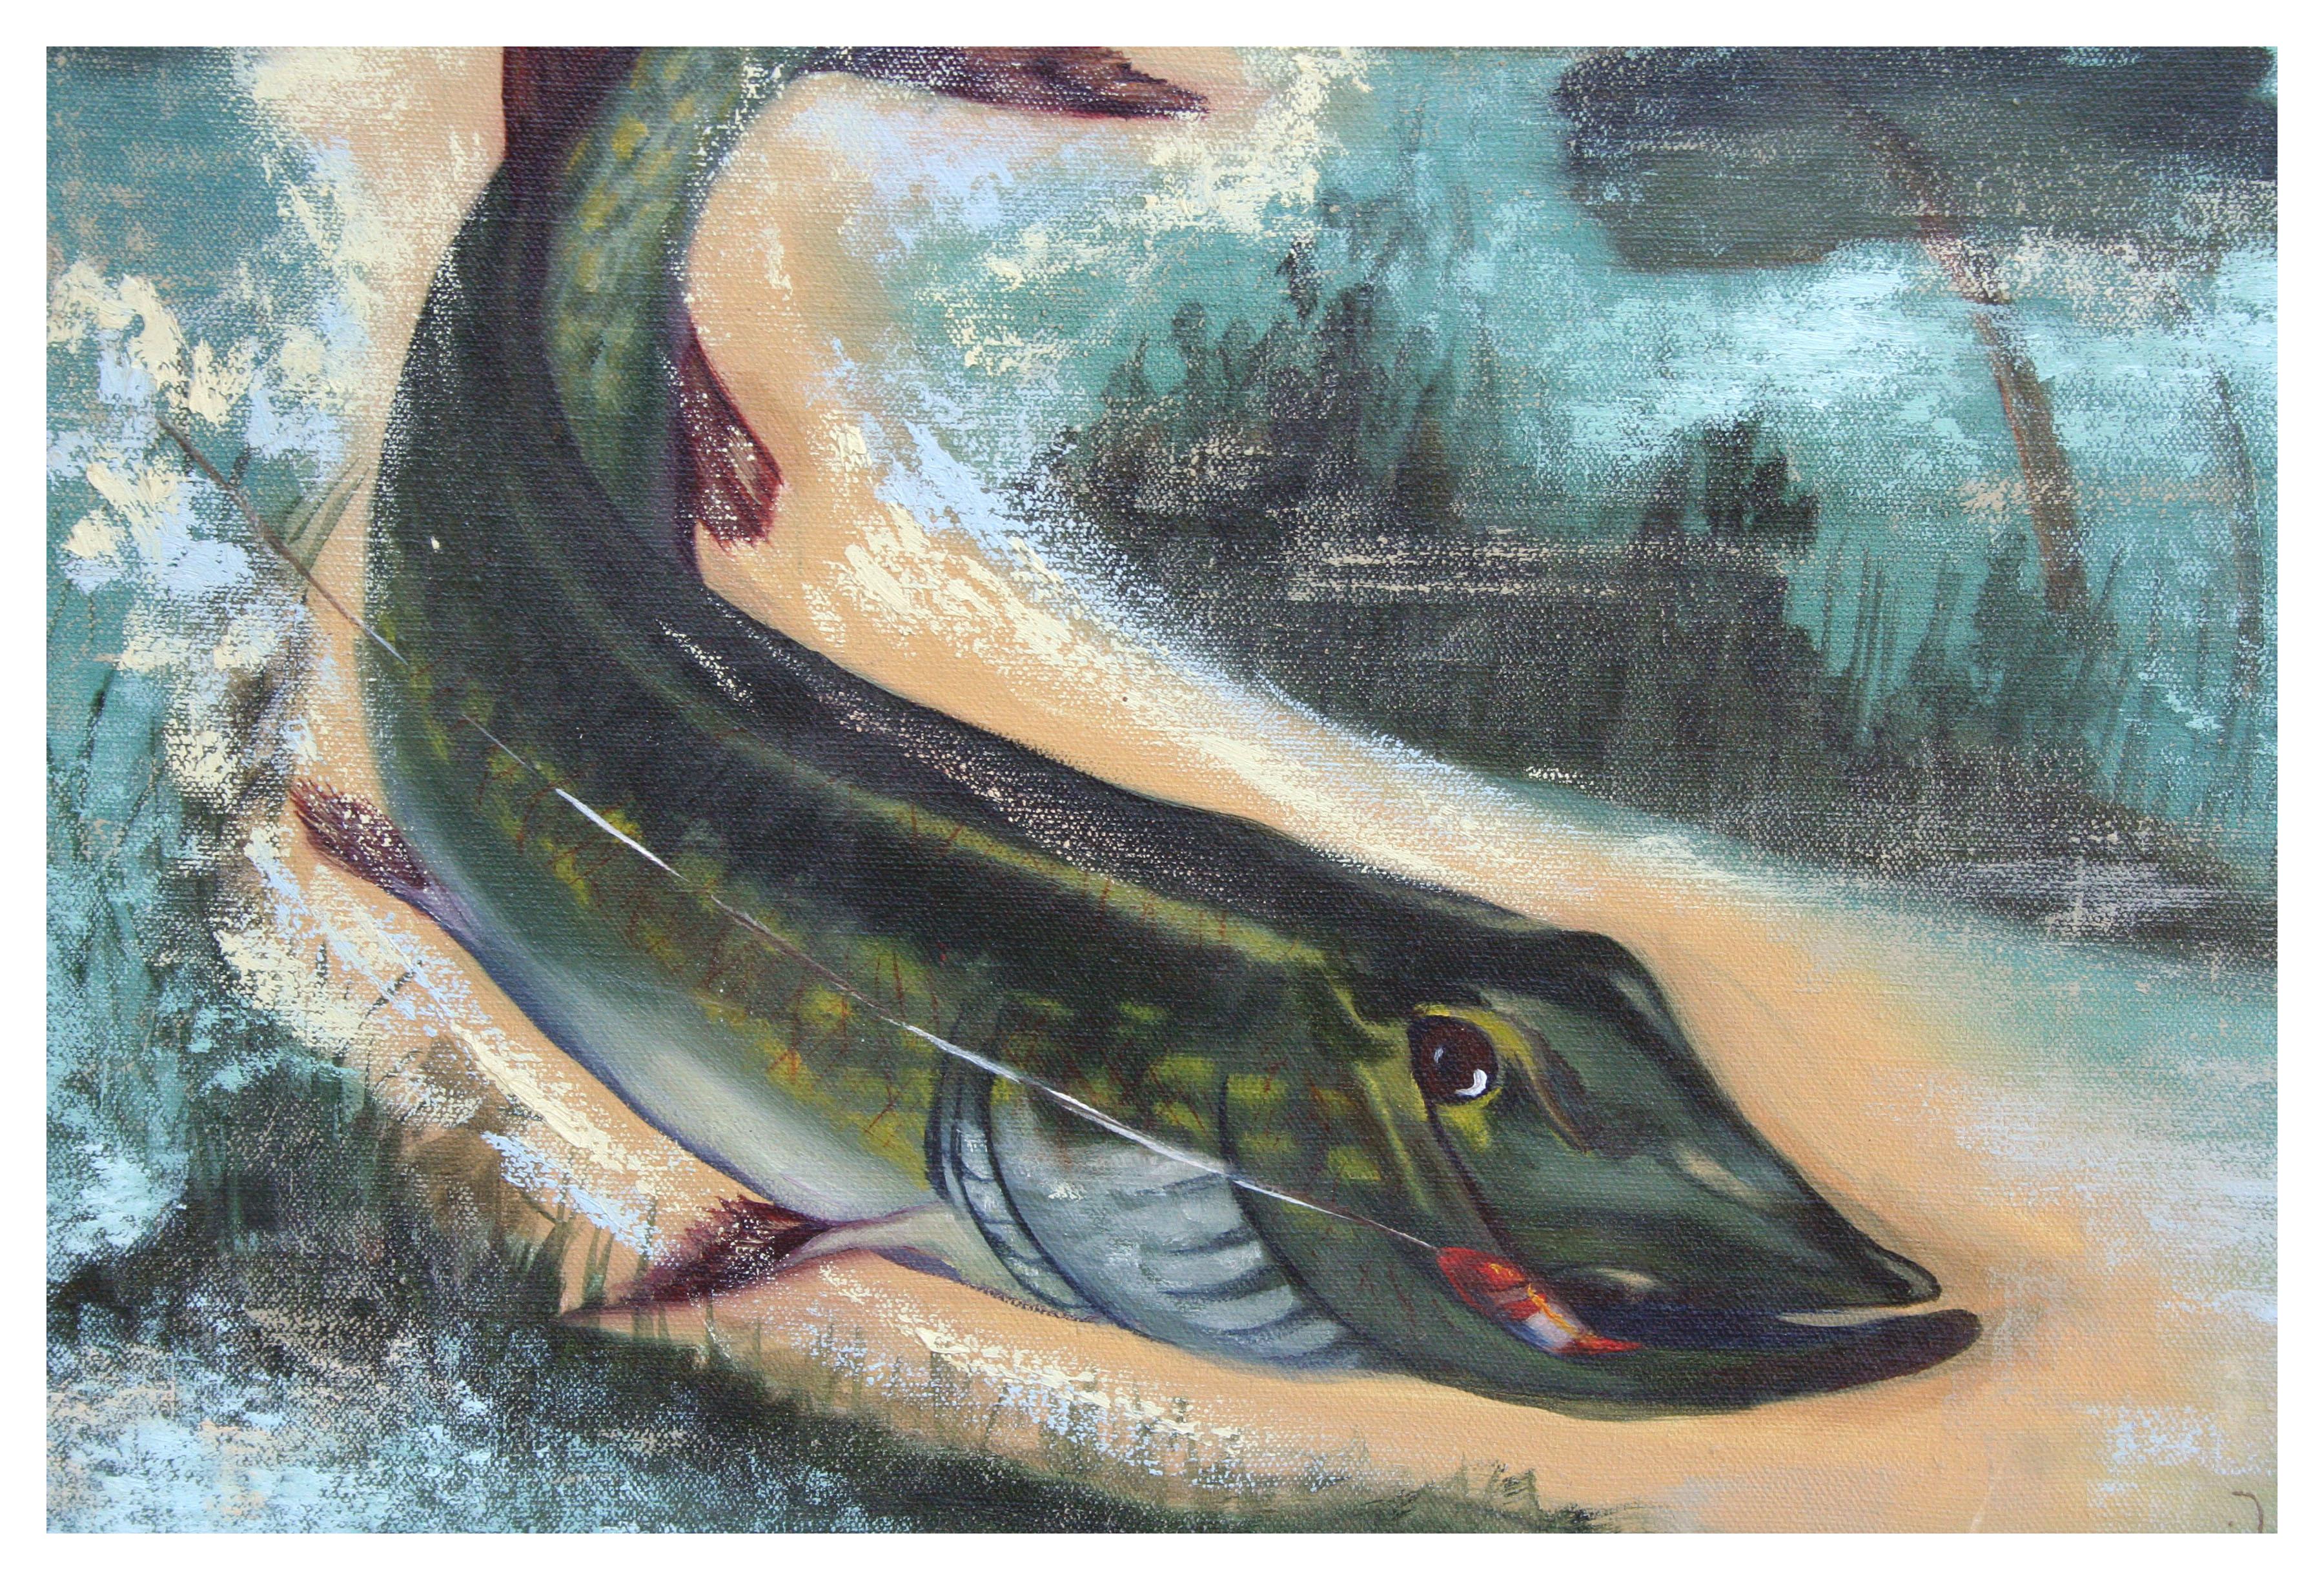 Northern Pike, Fish on Hook  - Painting by Unknown